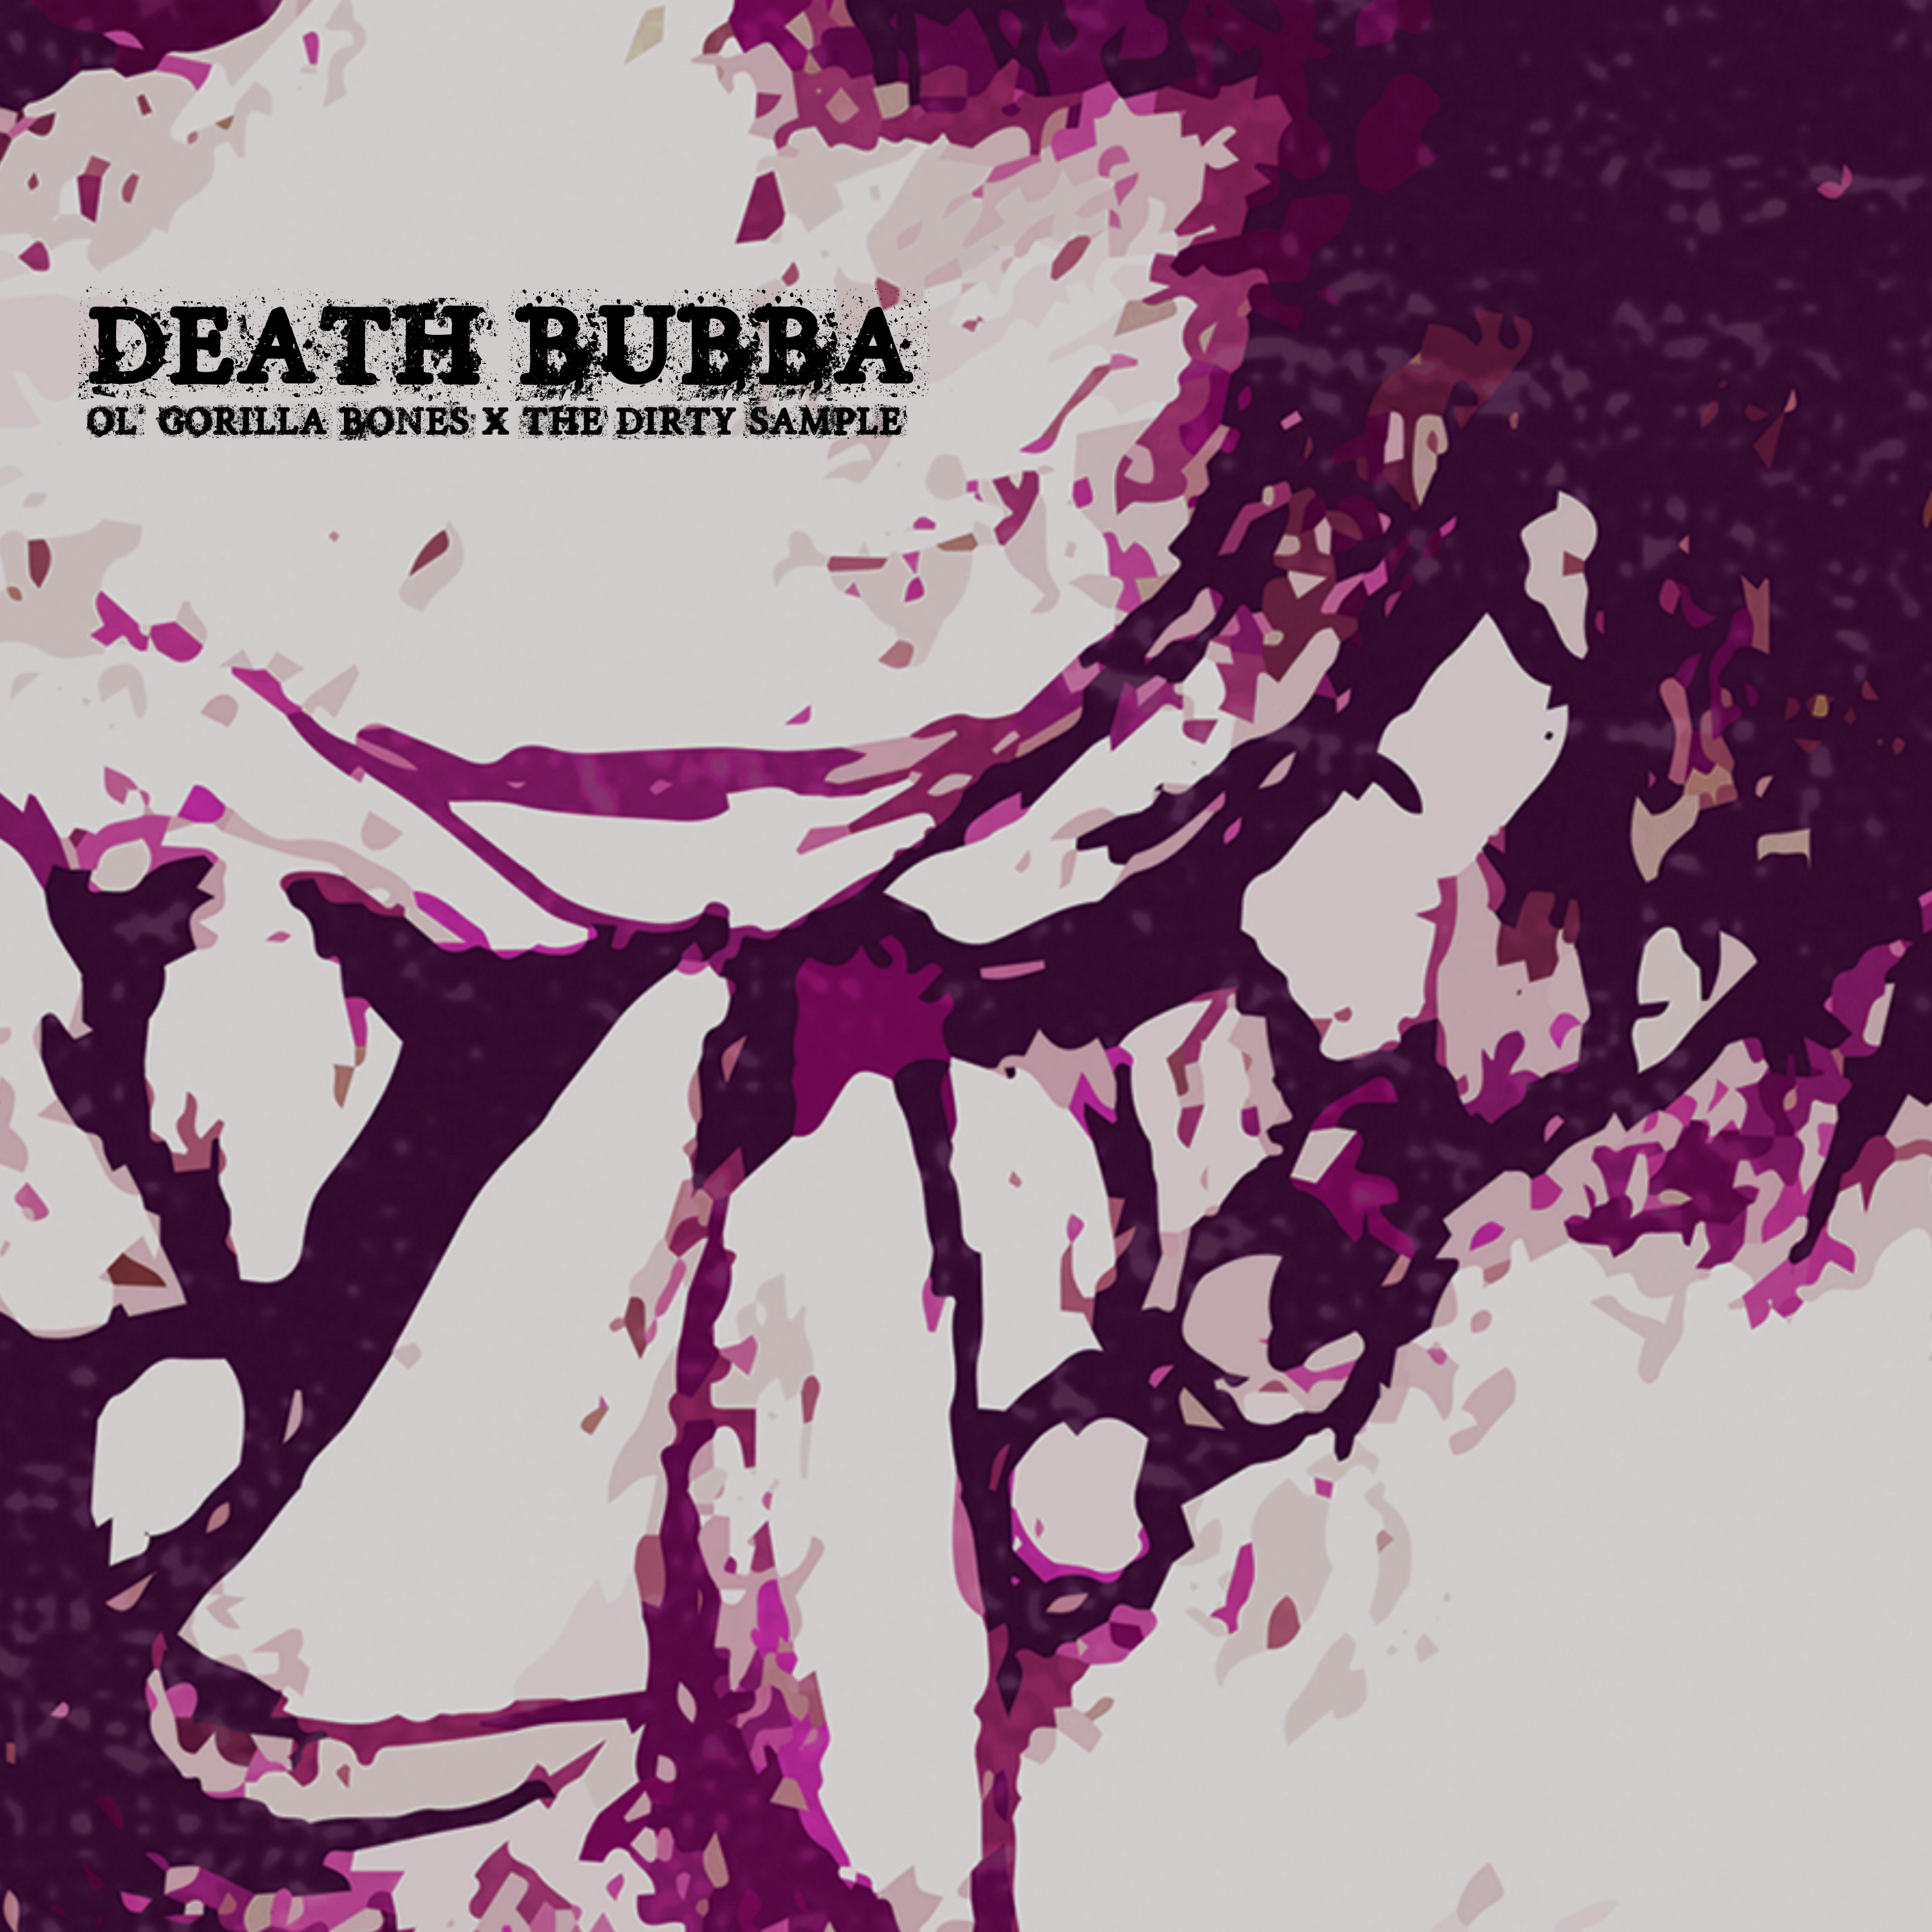 Art for Death Bubba by Ol' Gorilla Bones & The Dirty Sample